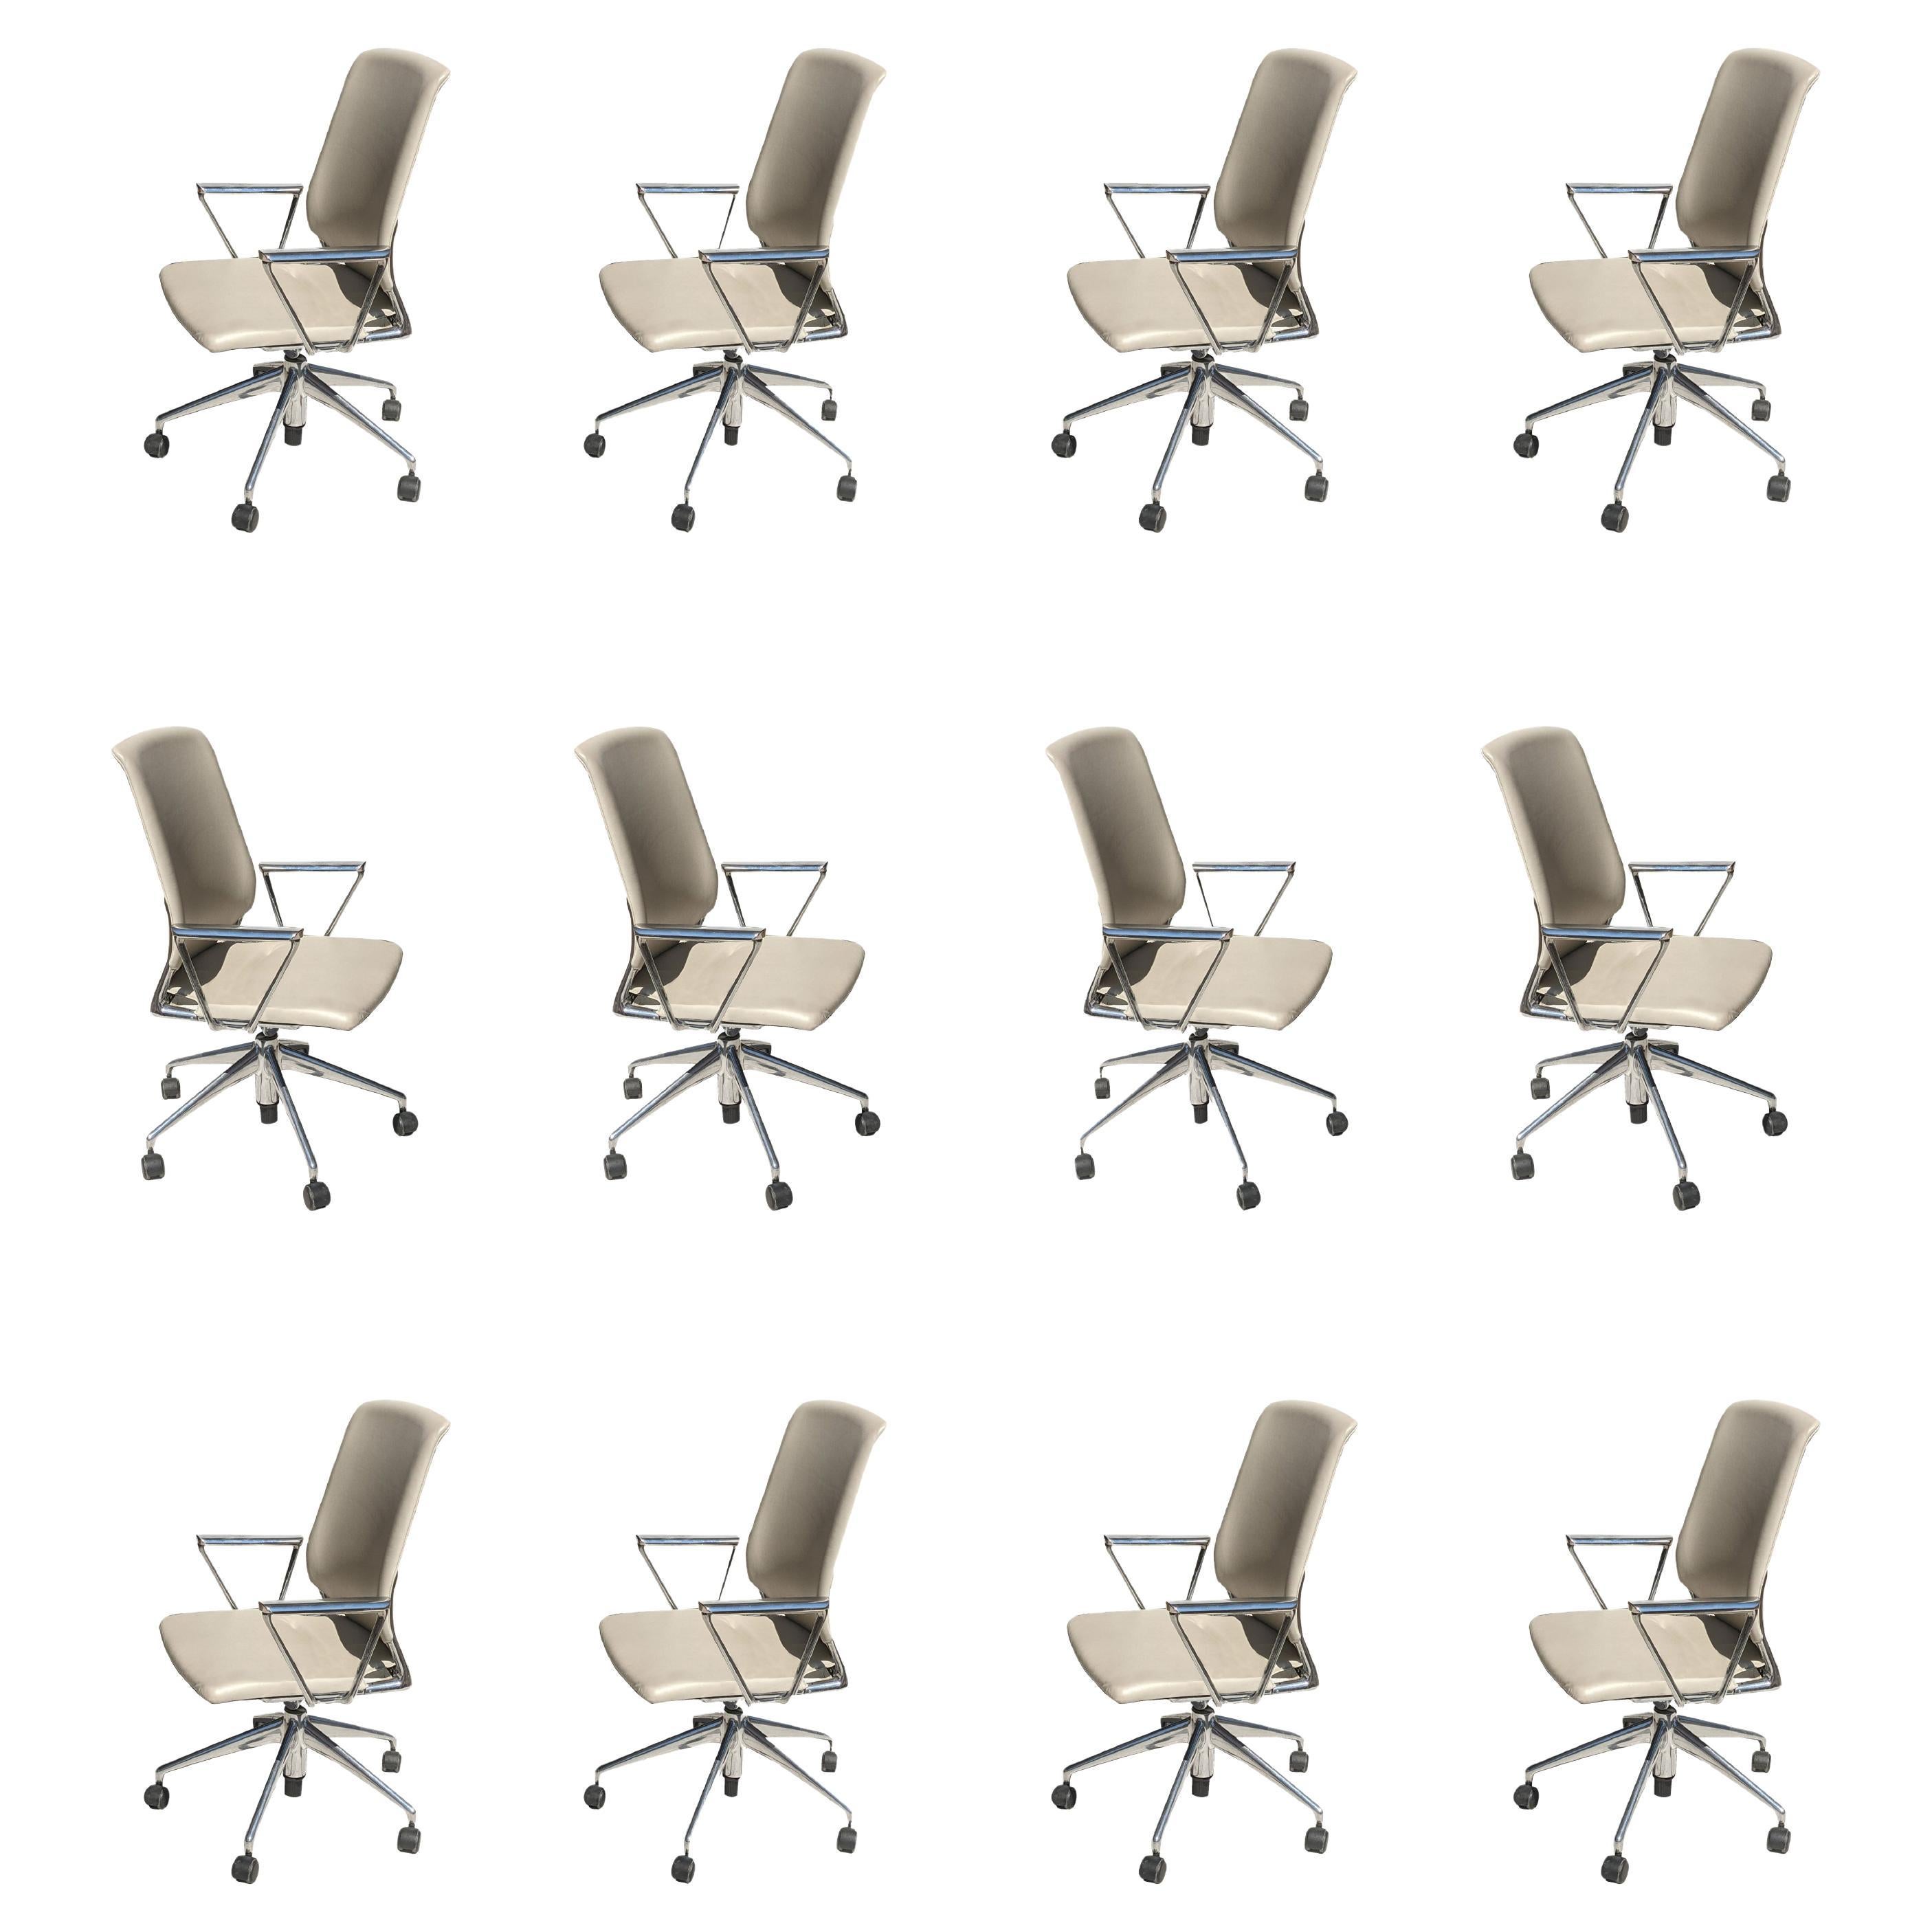 1 Vitra Meta Conference Chair by Alberto Meda 12 Available For Sale